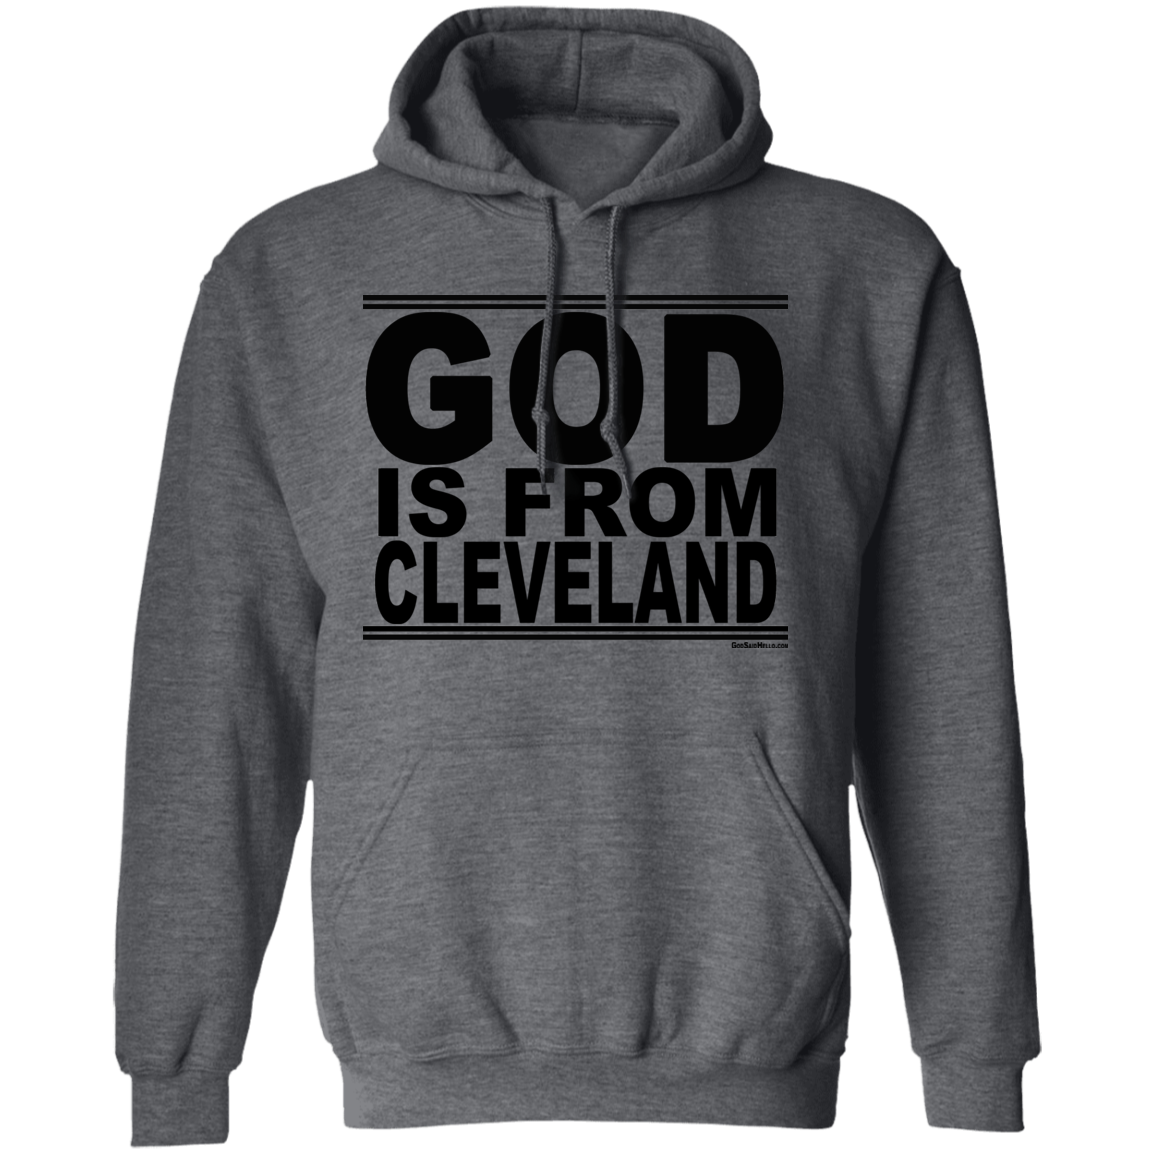 #GodIsFromCleveland - Pullover Hoodie